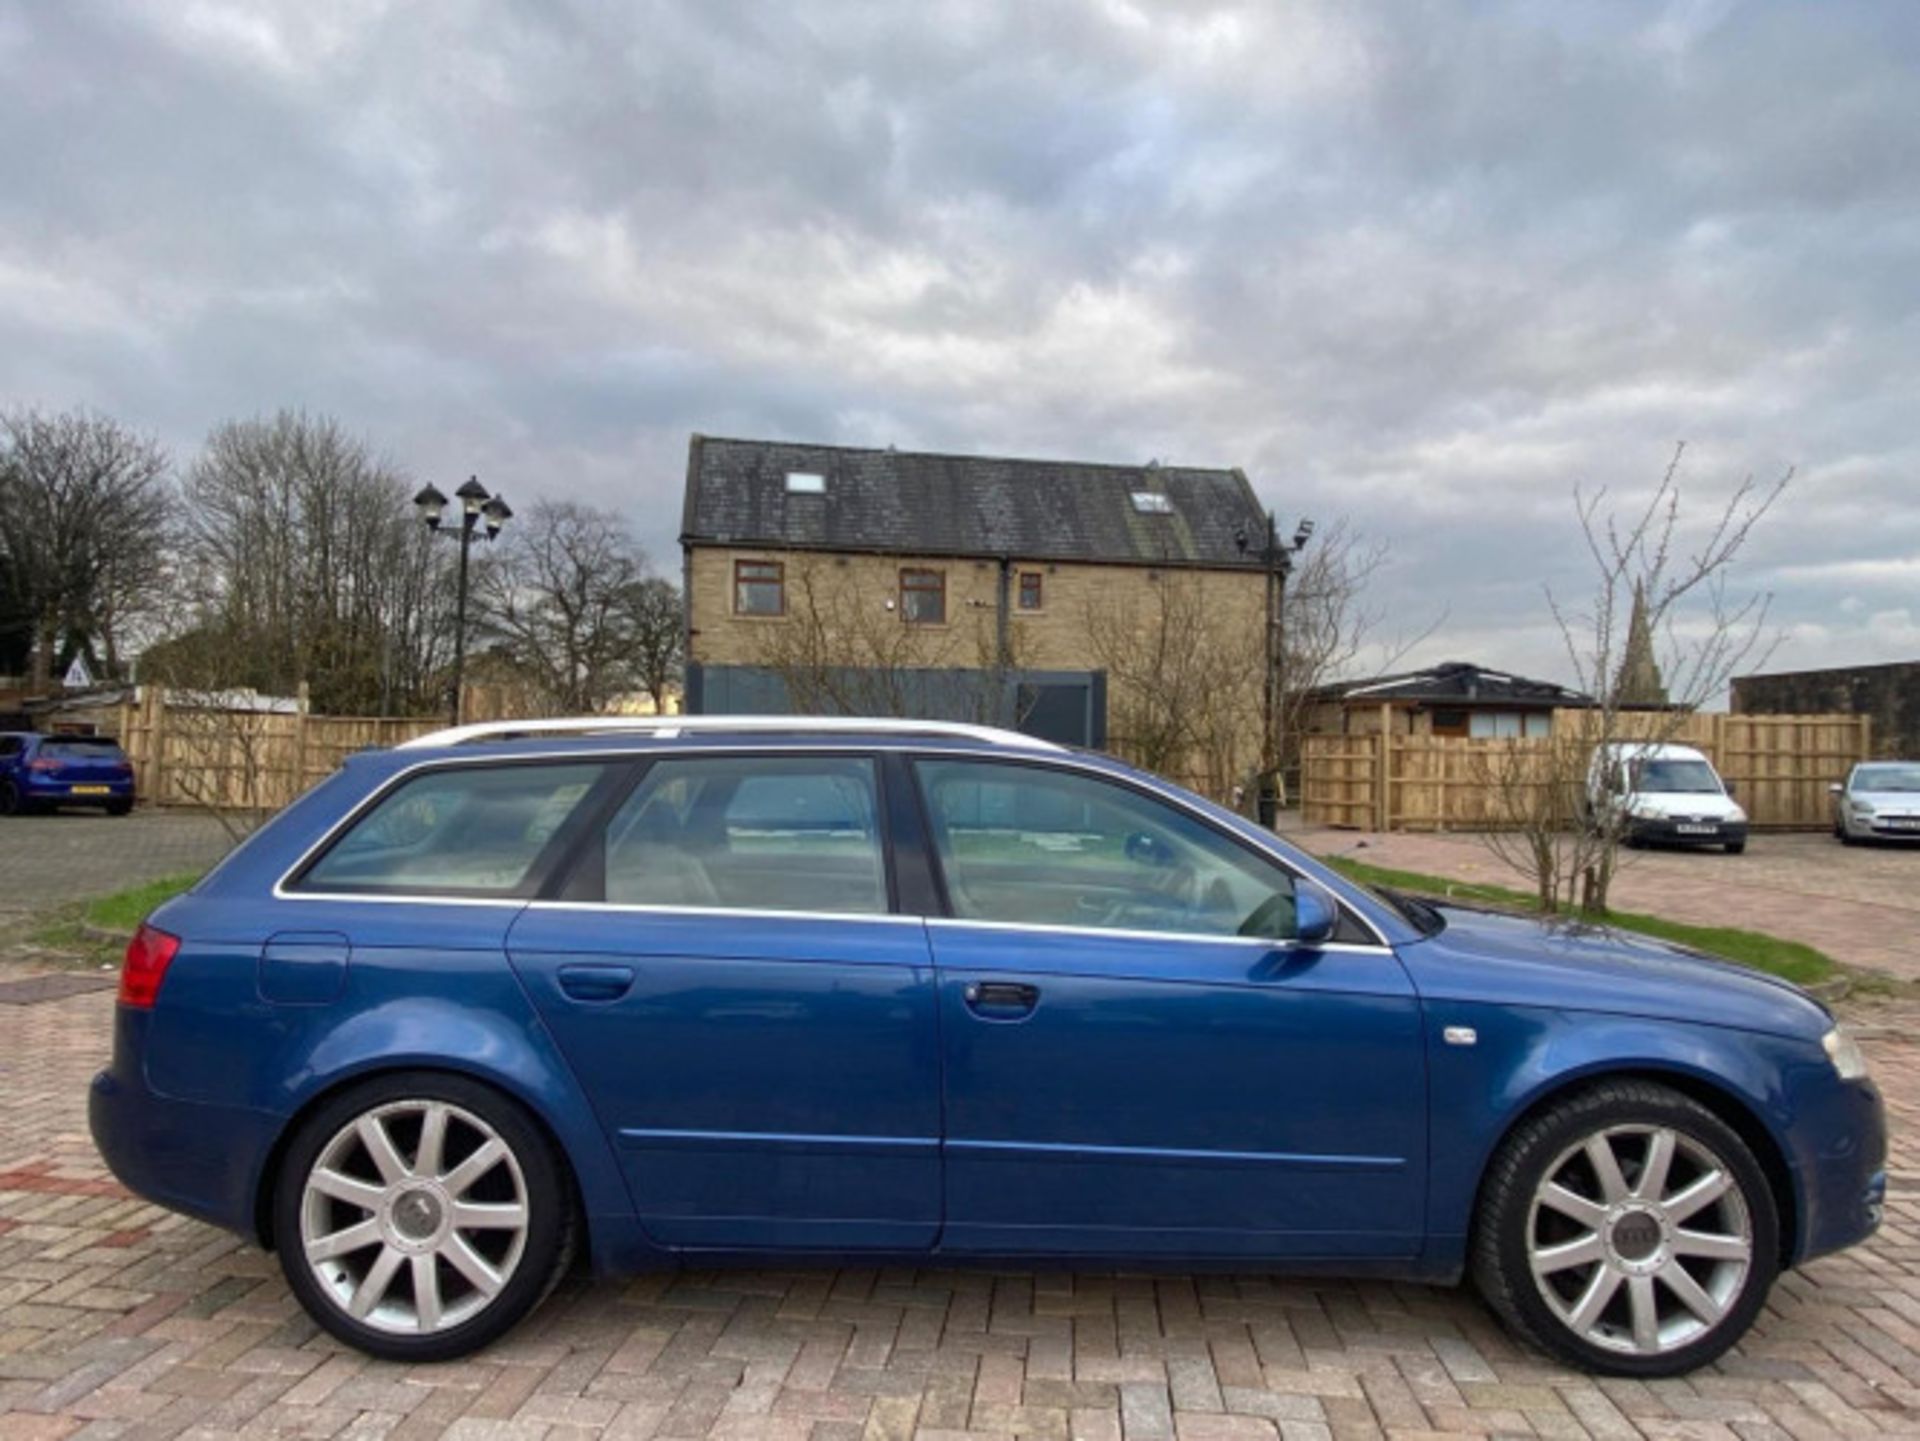 AUDI A4 AVANT 1.9 TDI SE 5DR ESTATE - RARE AND RELIABLE LUXURY WAGON >>--NO VAT ON HAMMER--<< - Image 93 of 97